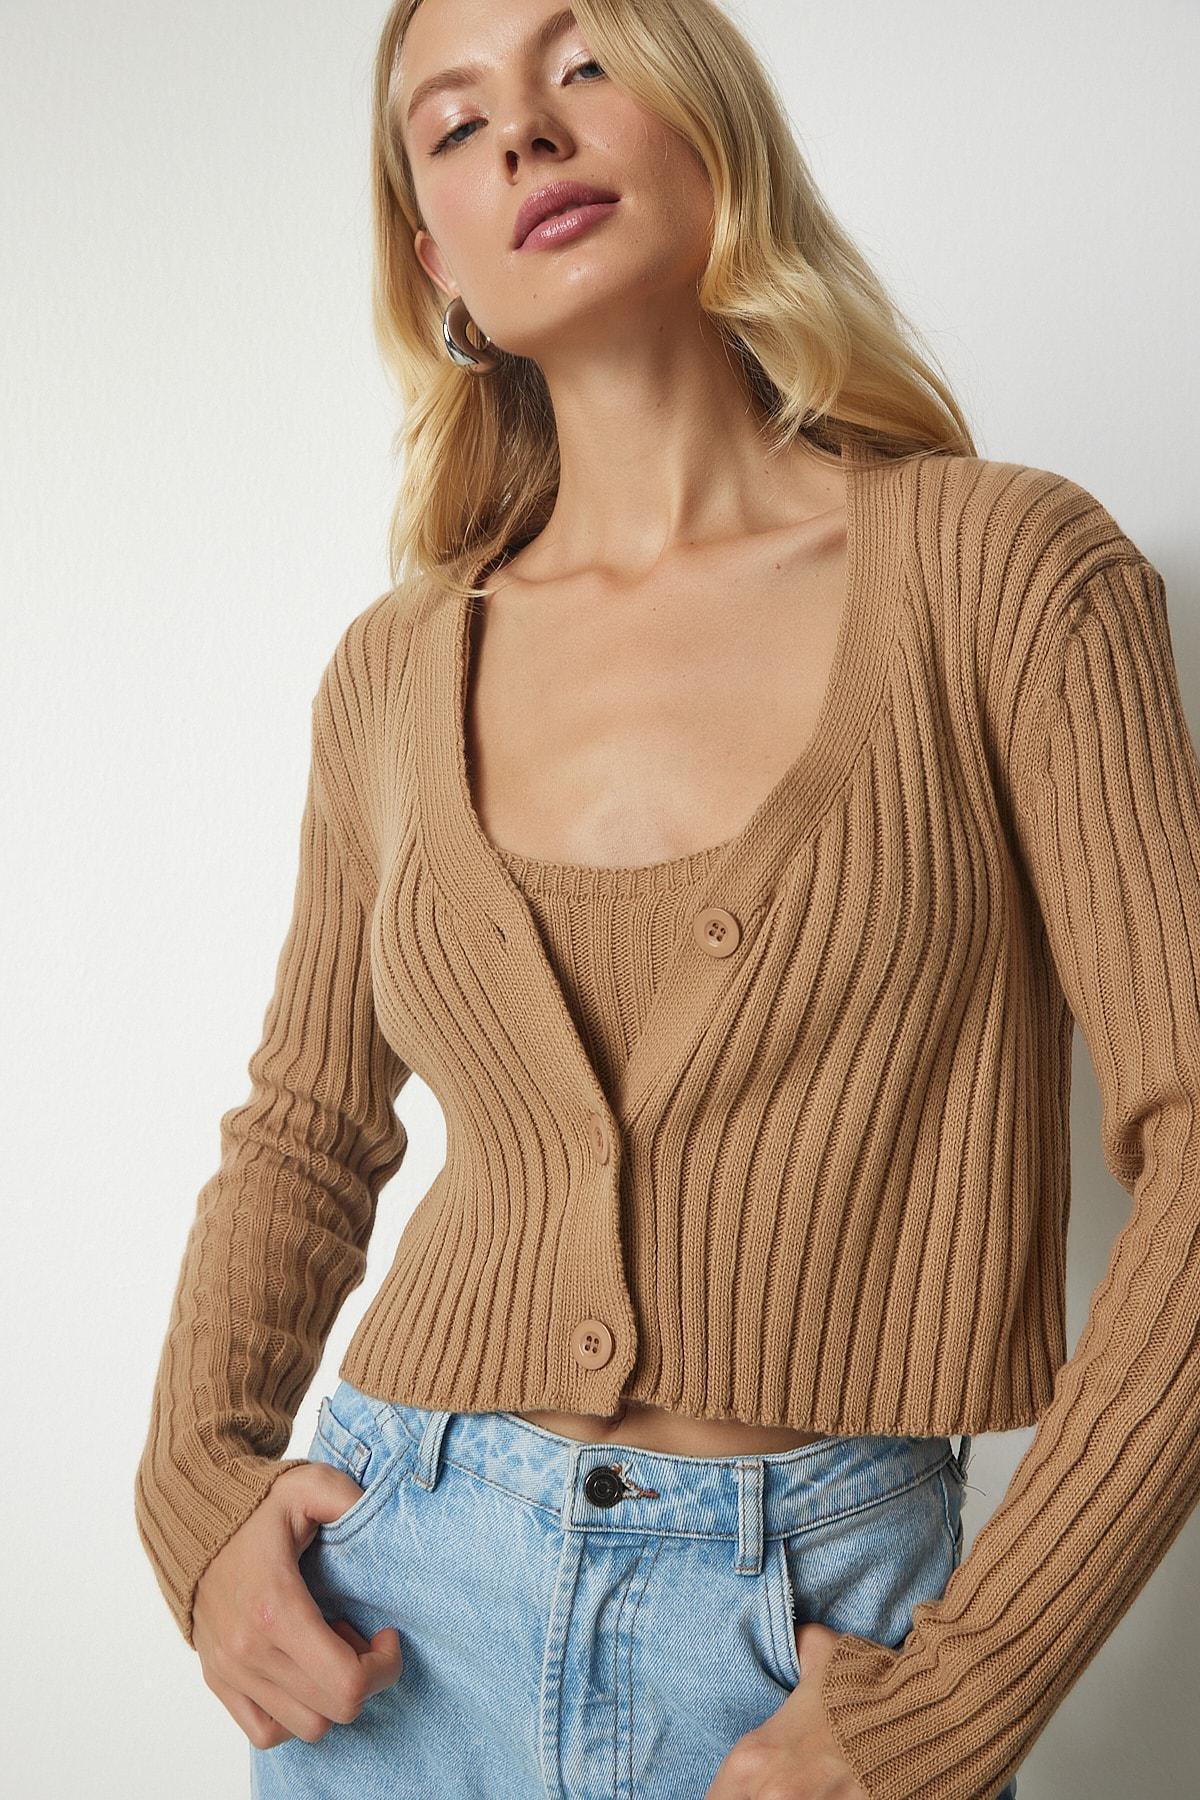 Happiness Istanbul - Beige Knitted Sweater Bustier Cardigan Co-Ord Set